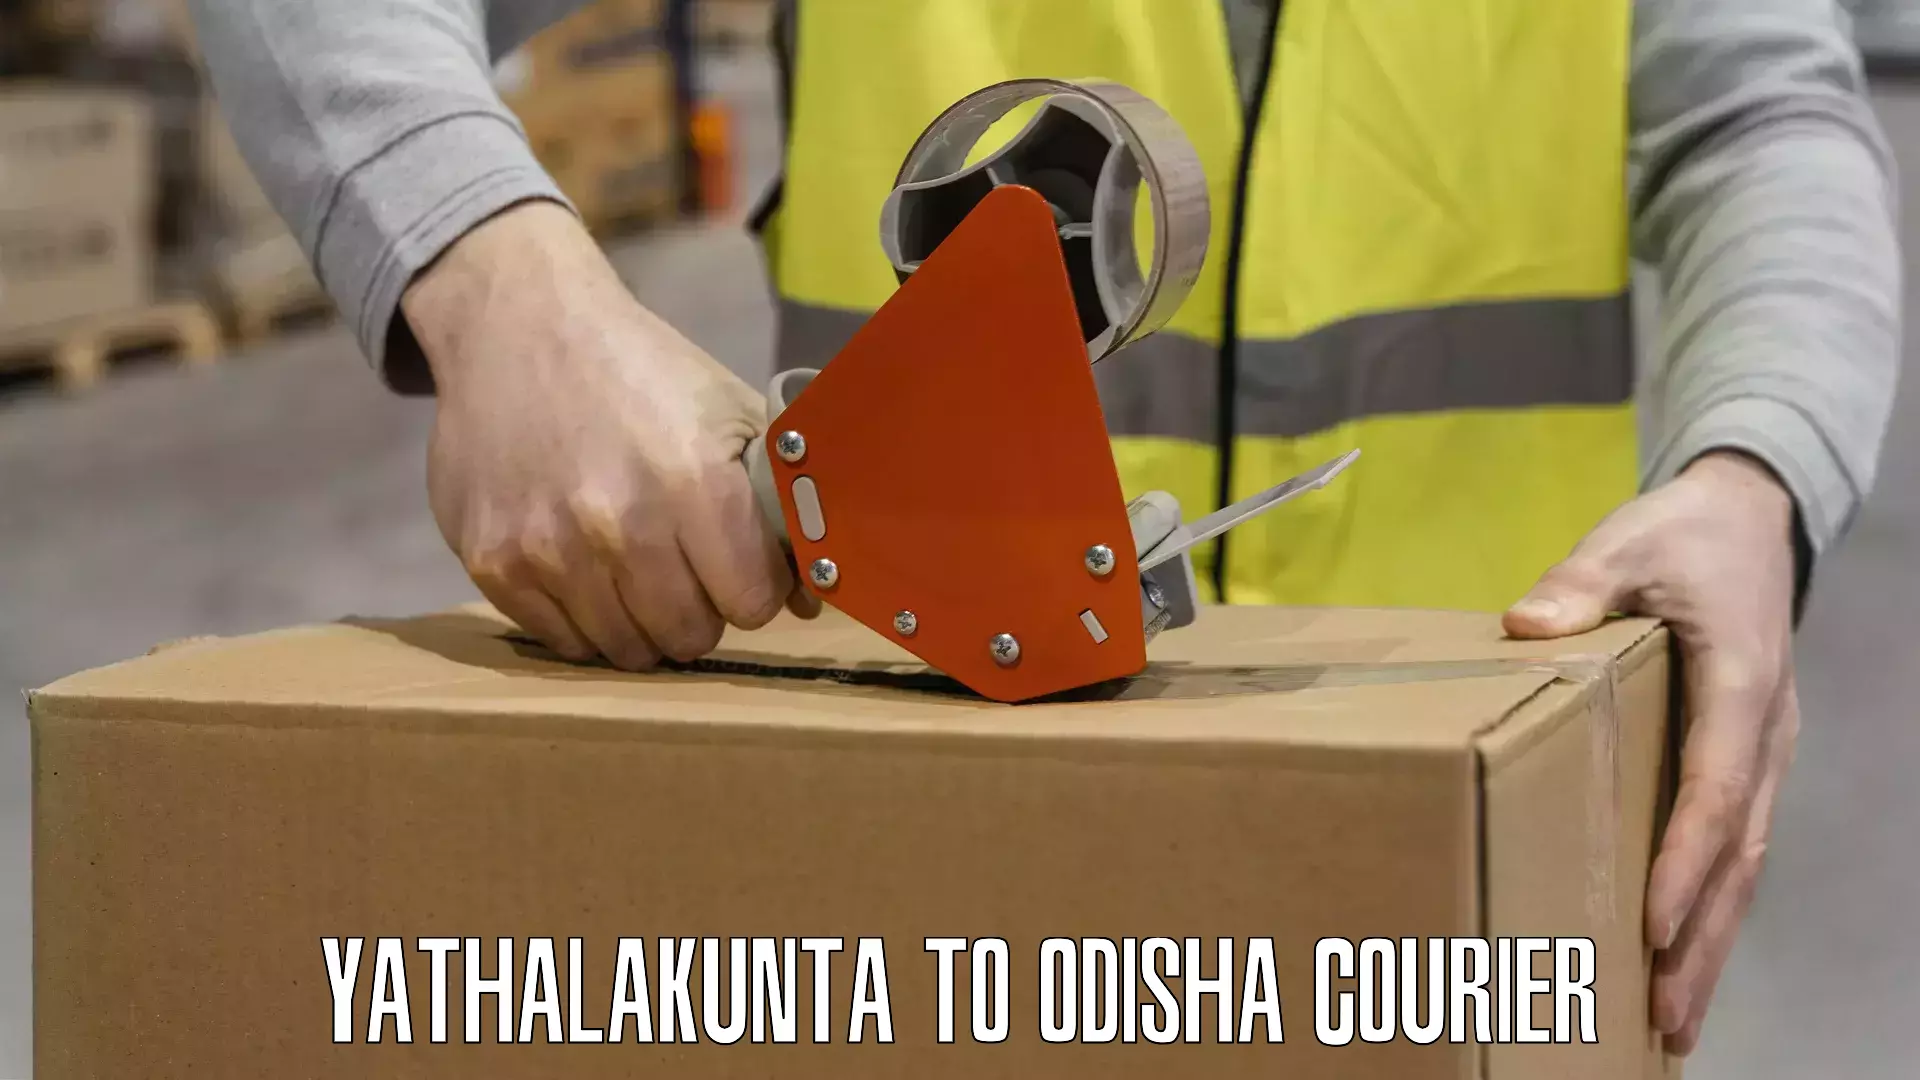 State-of-the-art courier technology Yathalakunta to Sohela